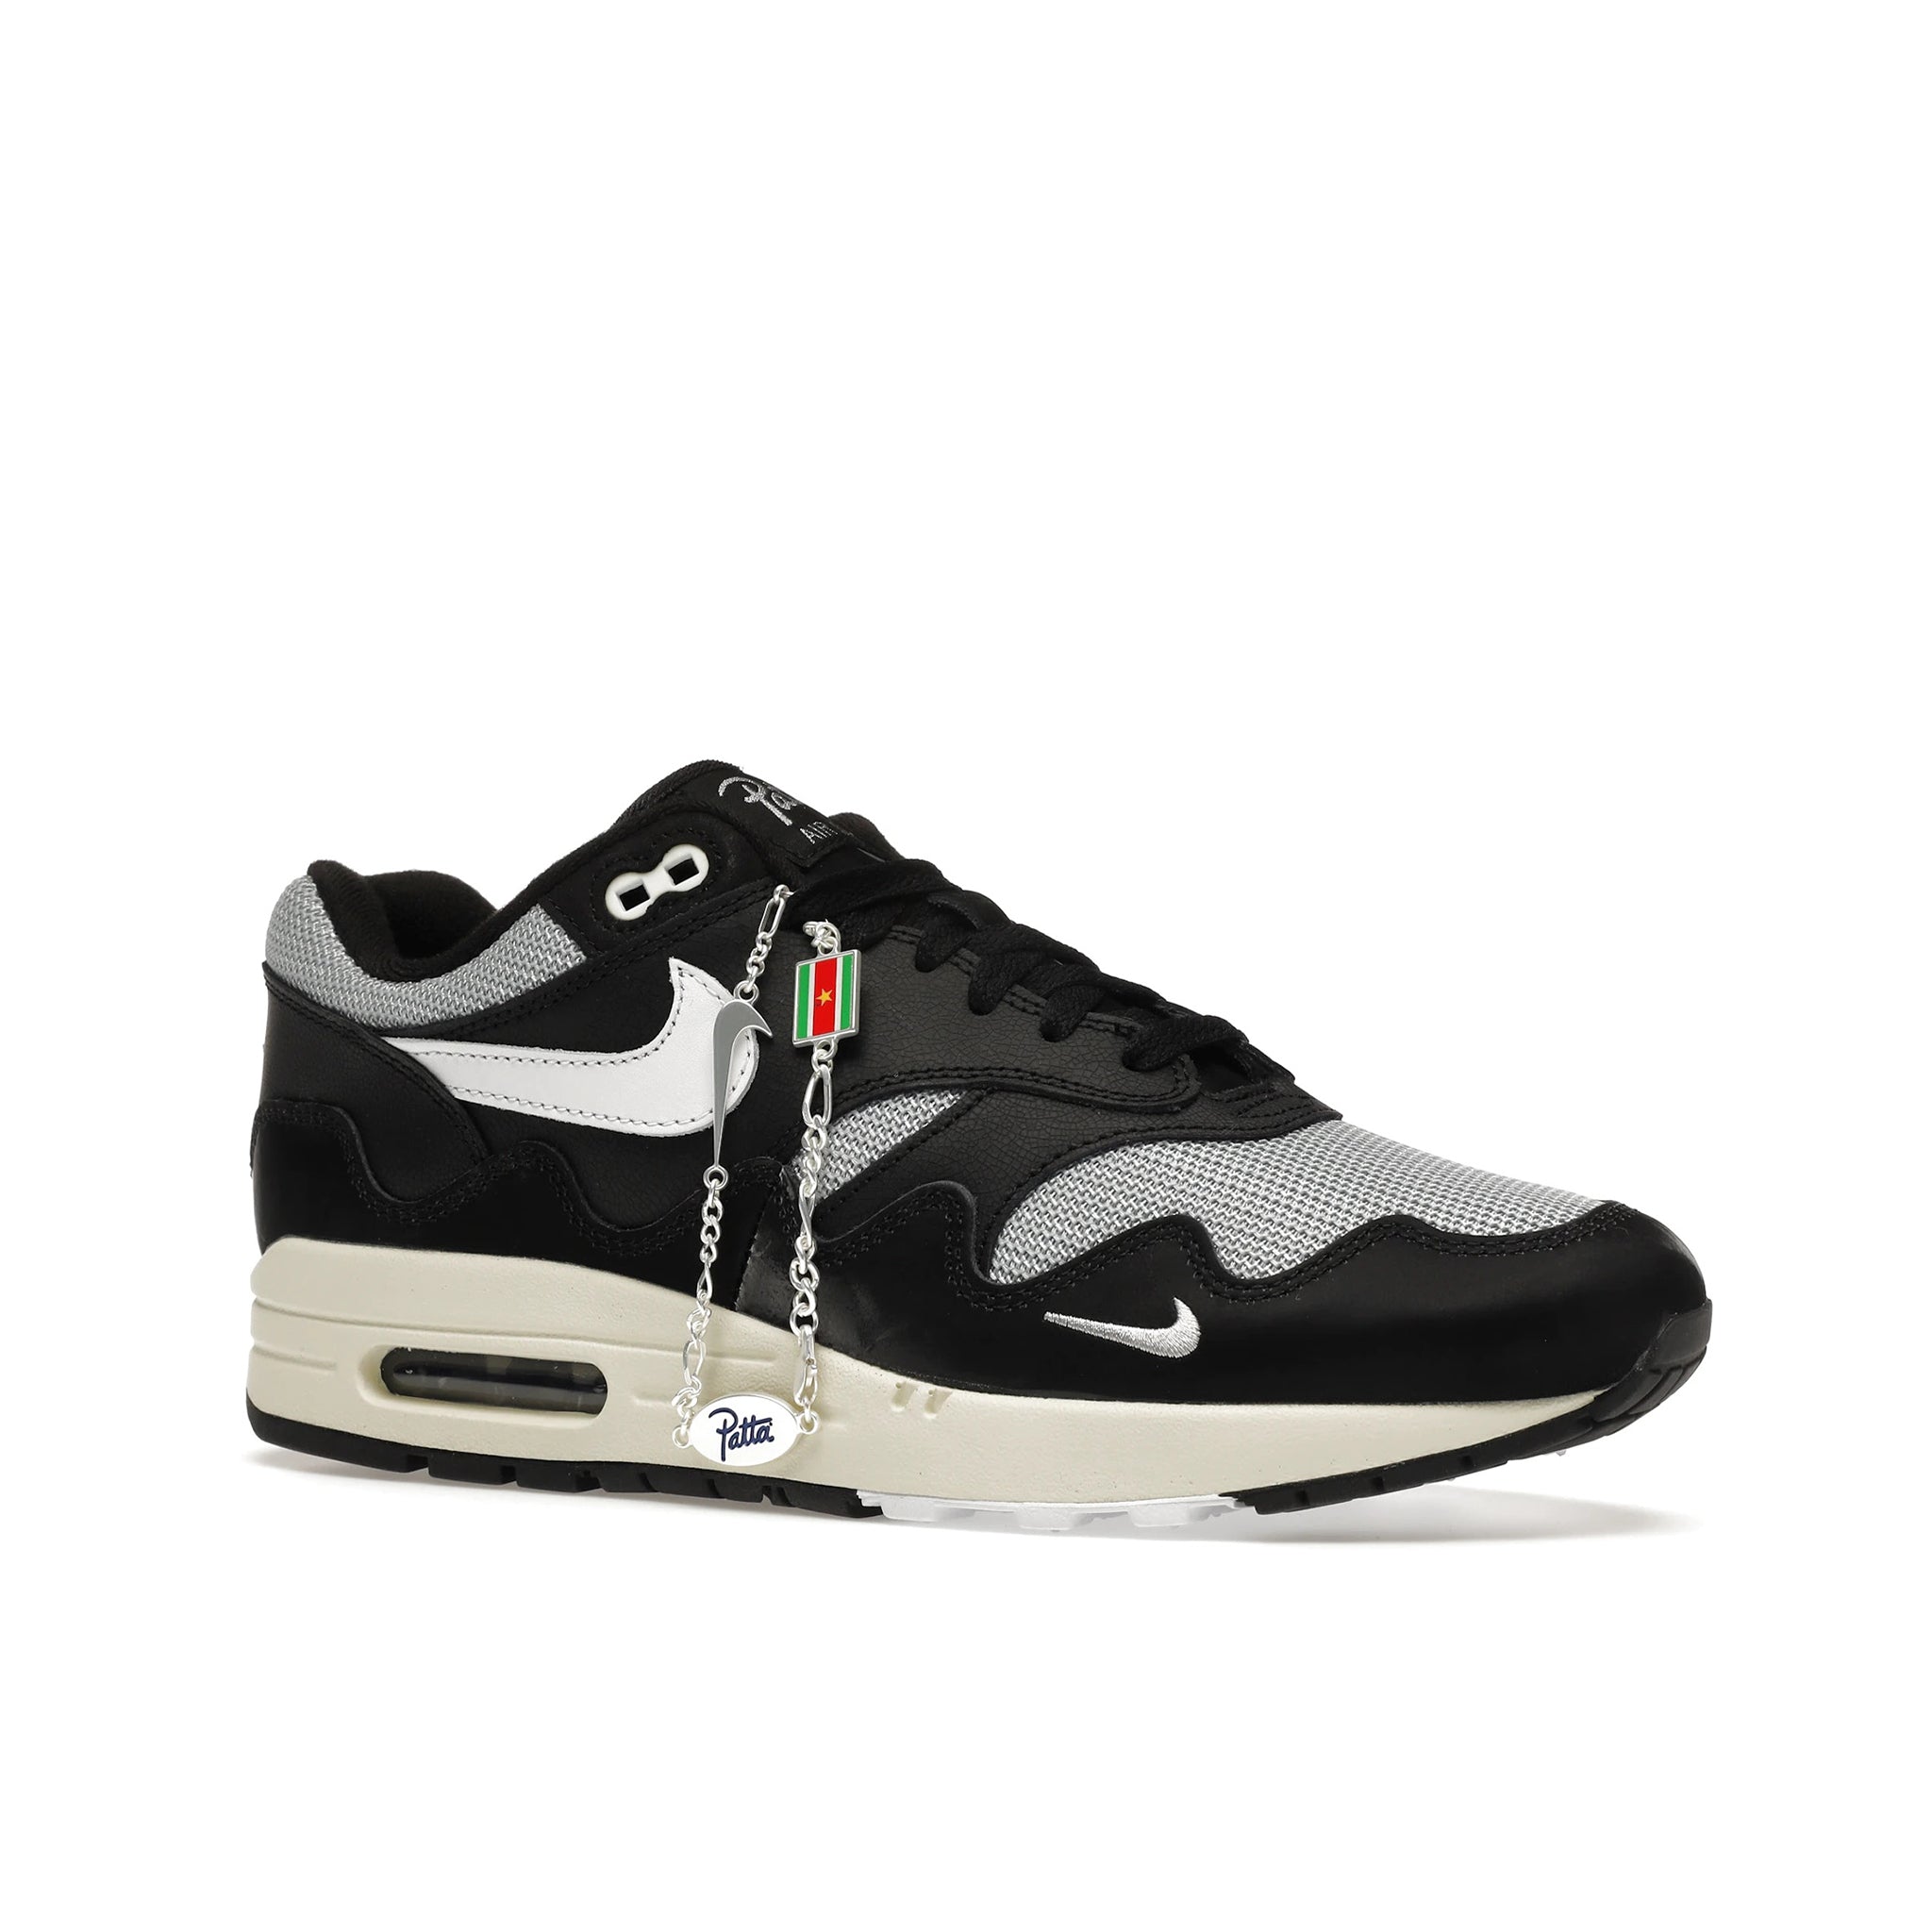 Image of Nike Air Max 1 Patta Waves Black (With Bracelet)